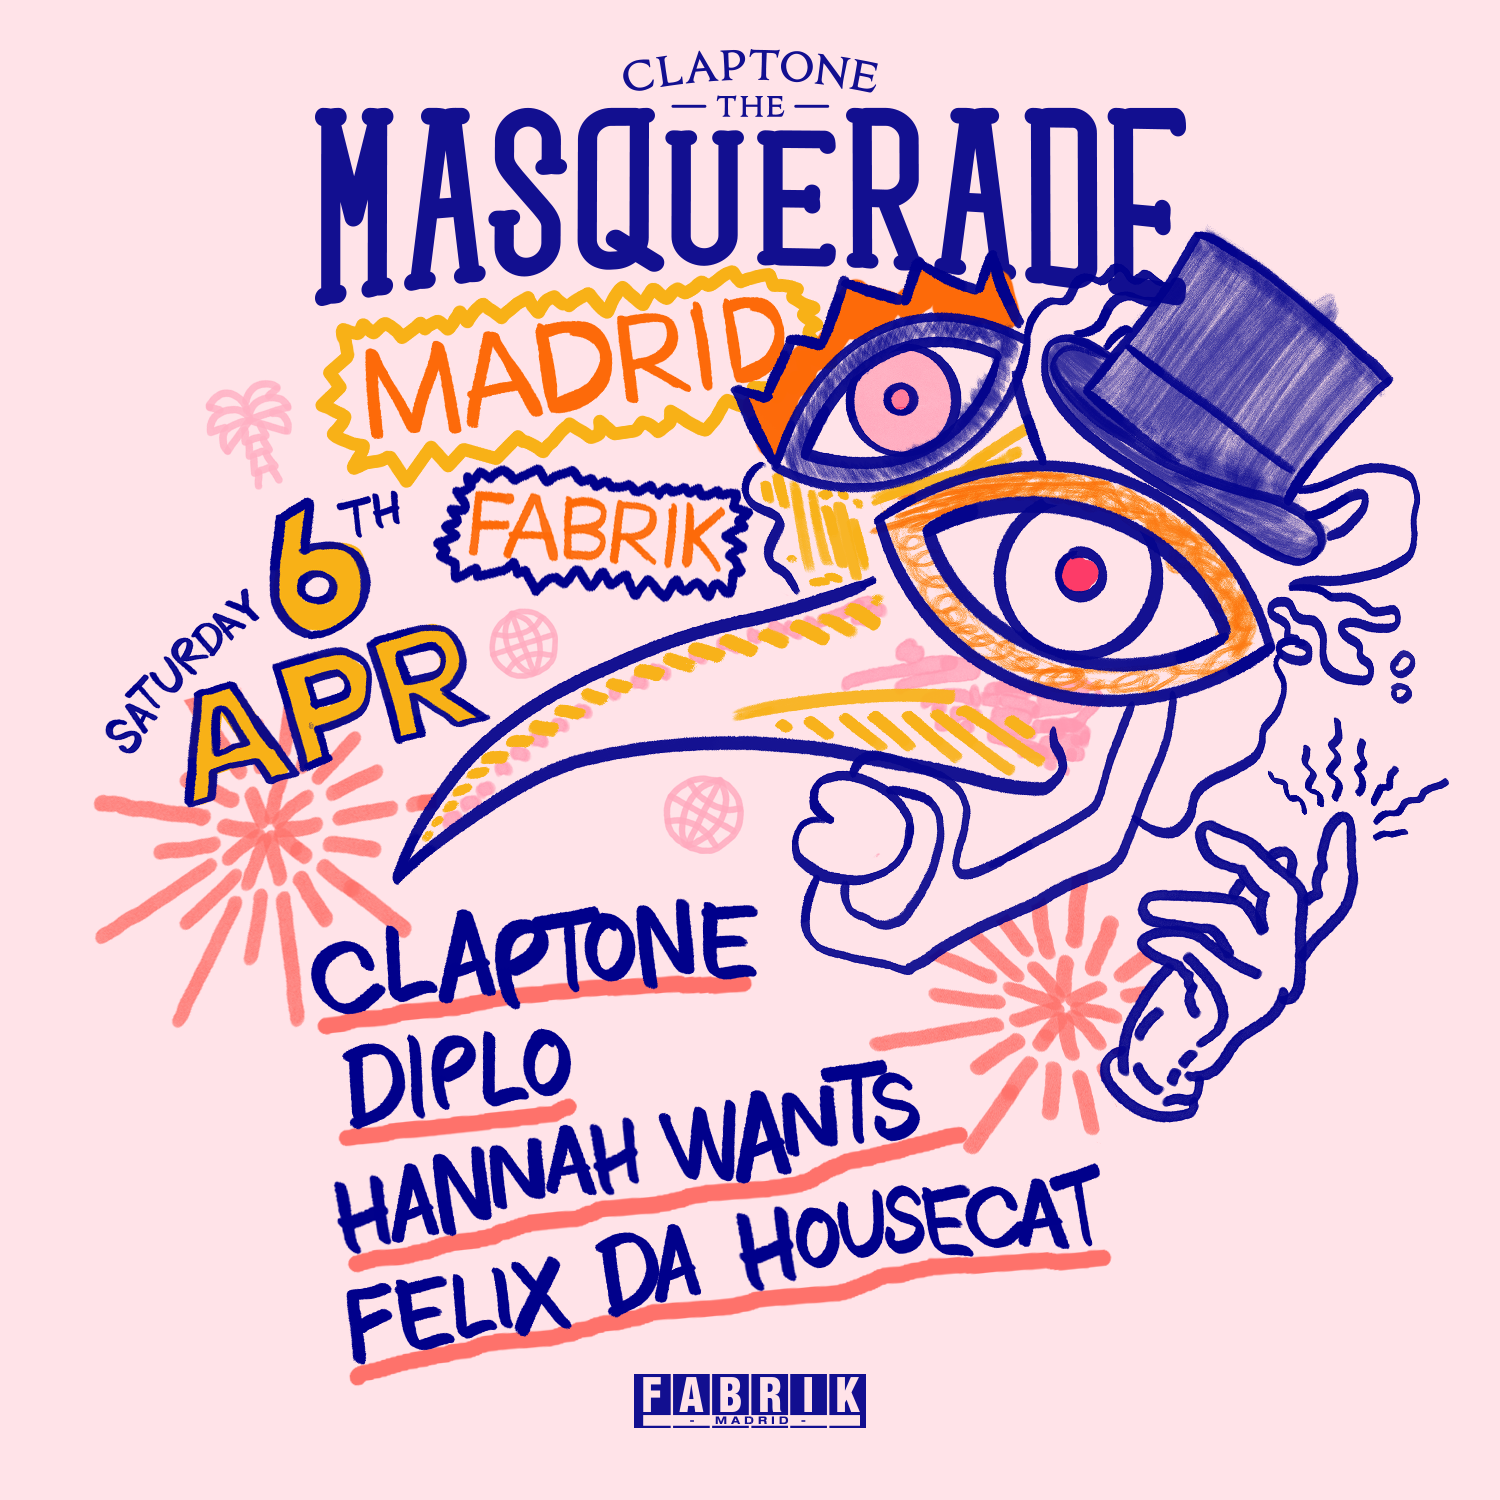 The Masquerade in Fabrik with Claptone, Diplo, Hannah Wants and Felix Da Housecat - フライヤー表